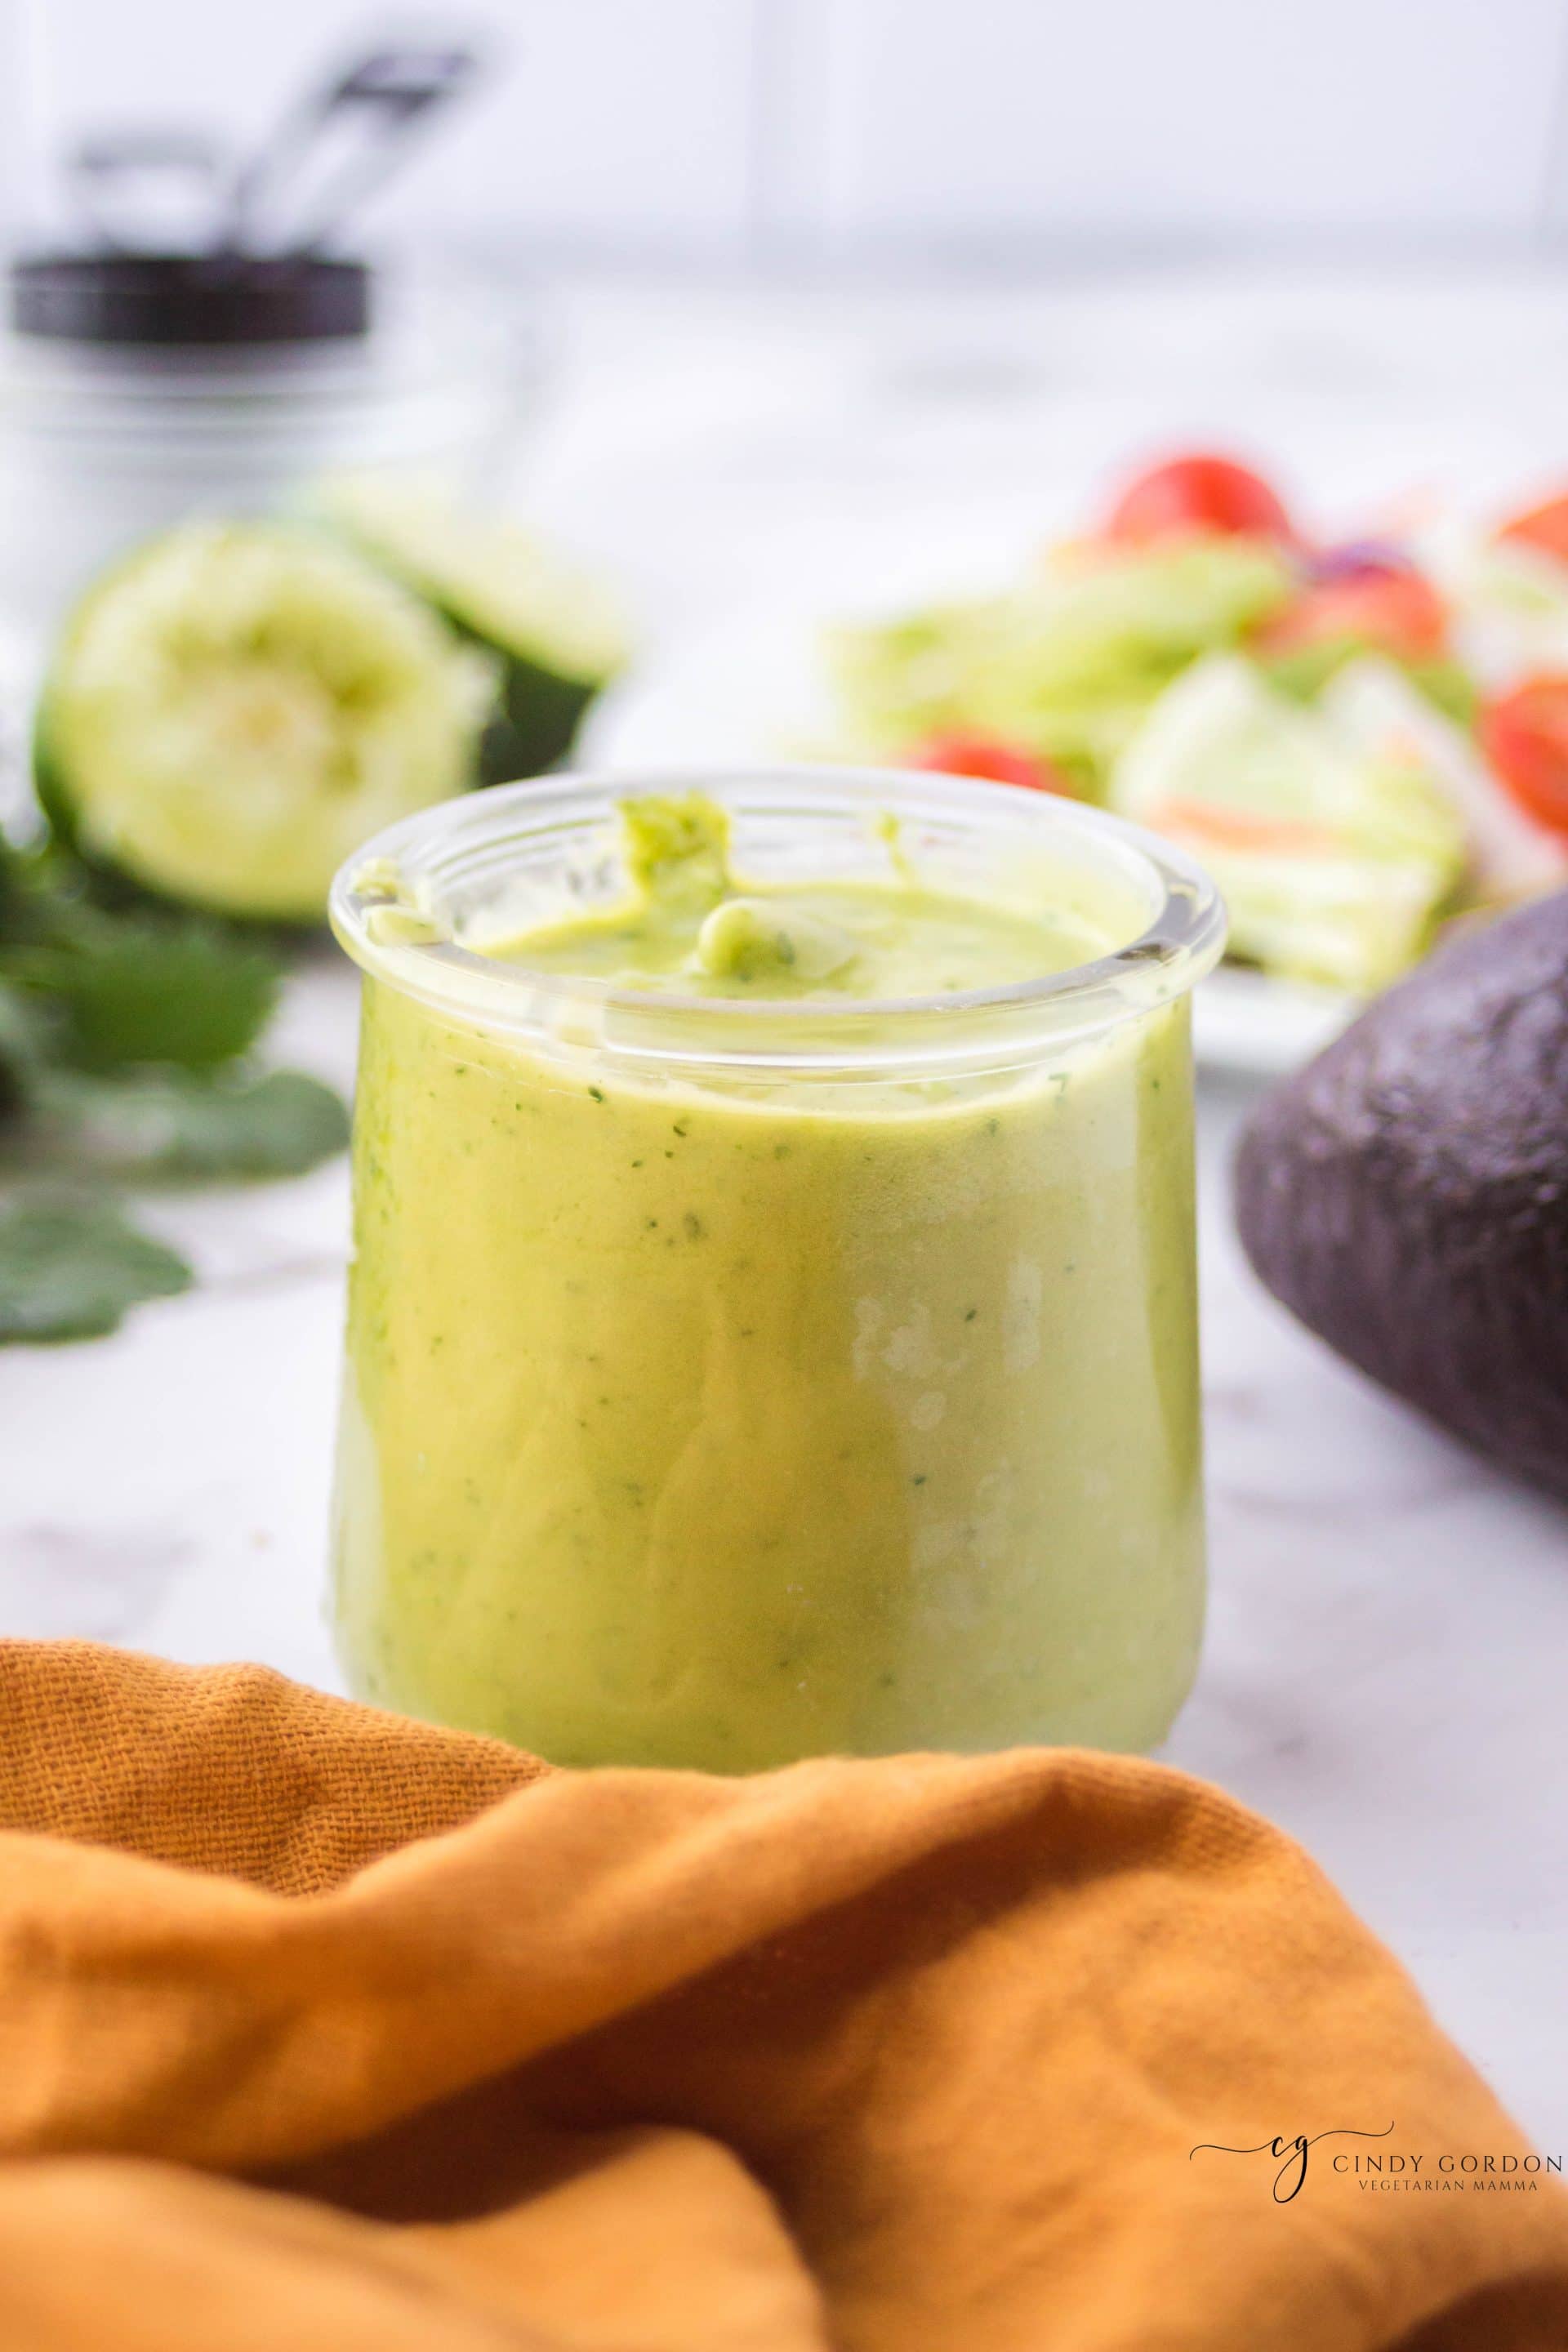 A jar of creamy avocado salad dressing with an orange towel in front